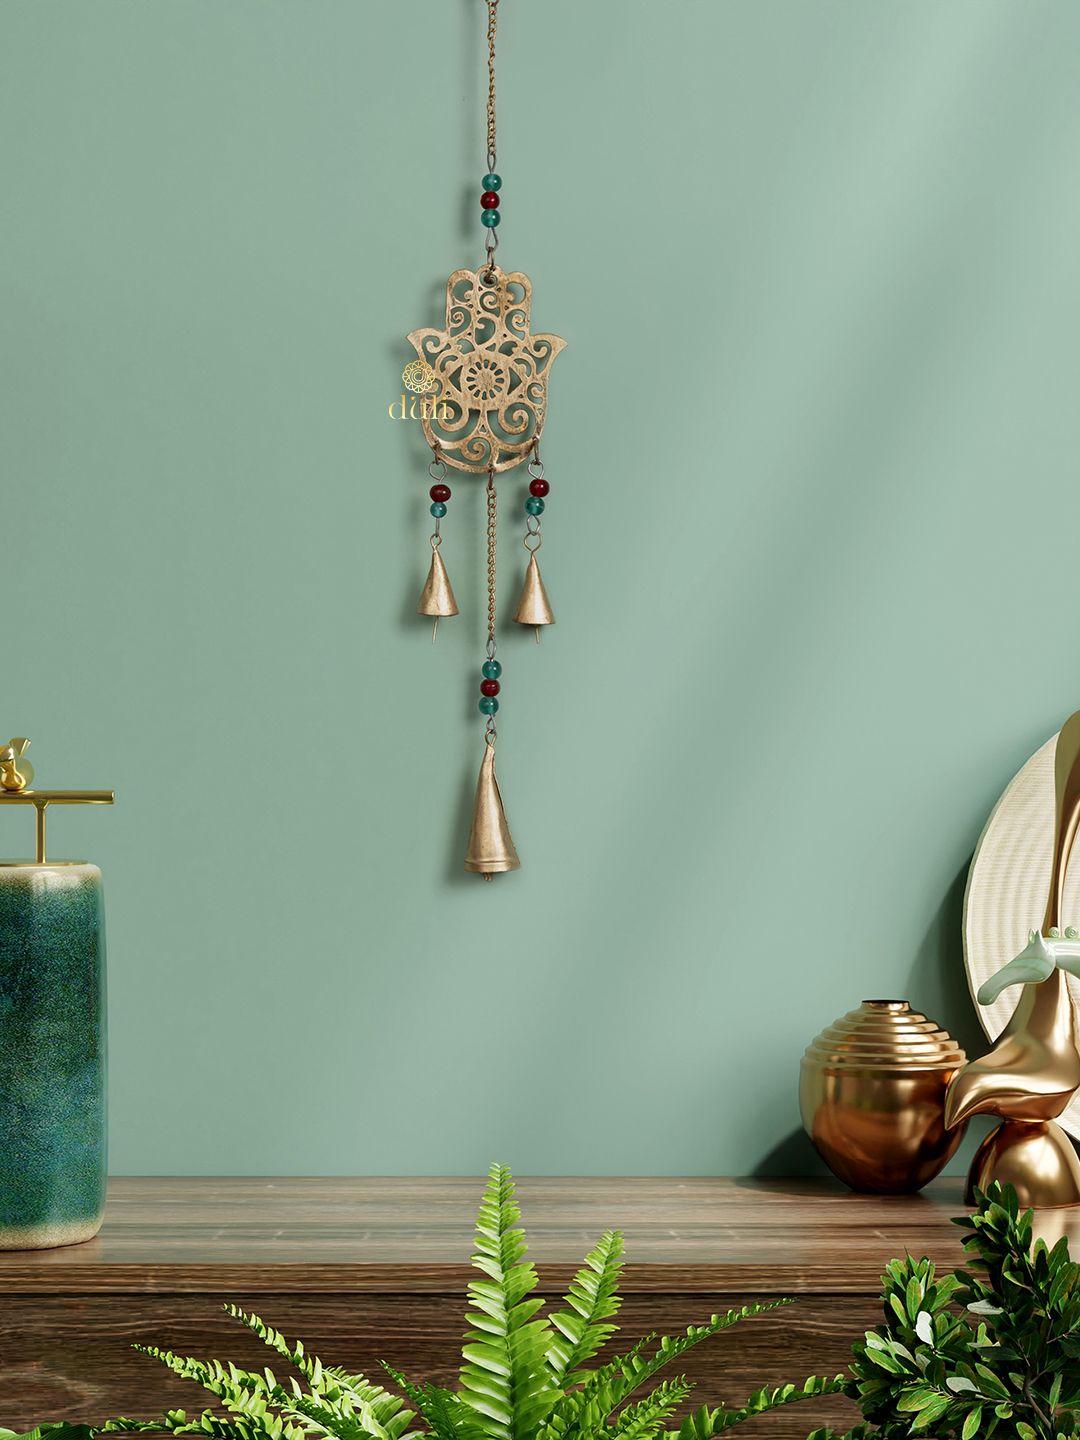 DULI Gold-Toned Hamsa Design Metal Wall Hanging Windchime With Hanging Bells Price in India